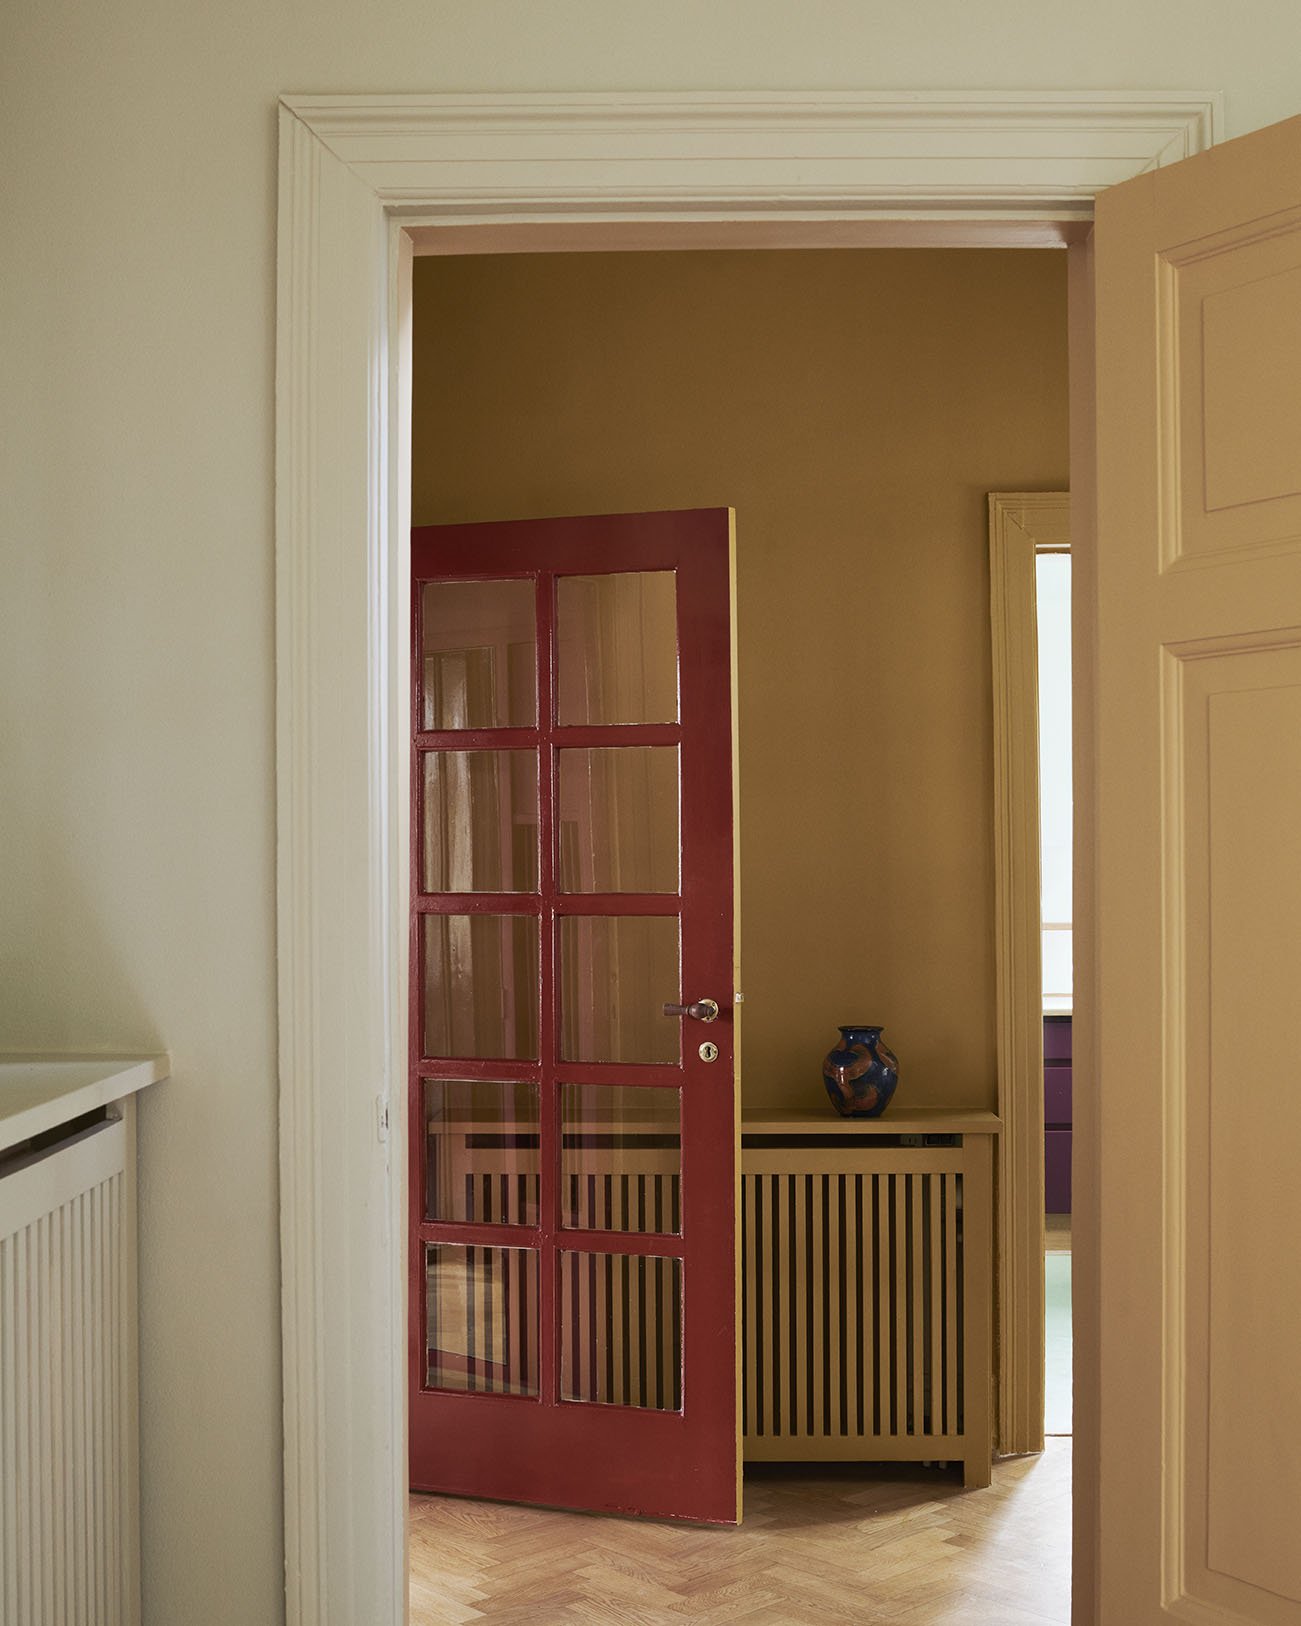 Wall and radiator painted with 'Mean Mustard'